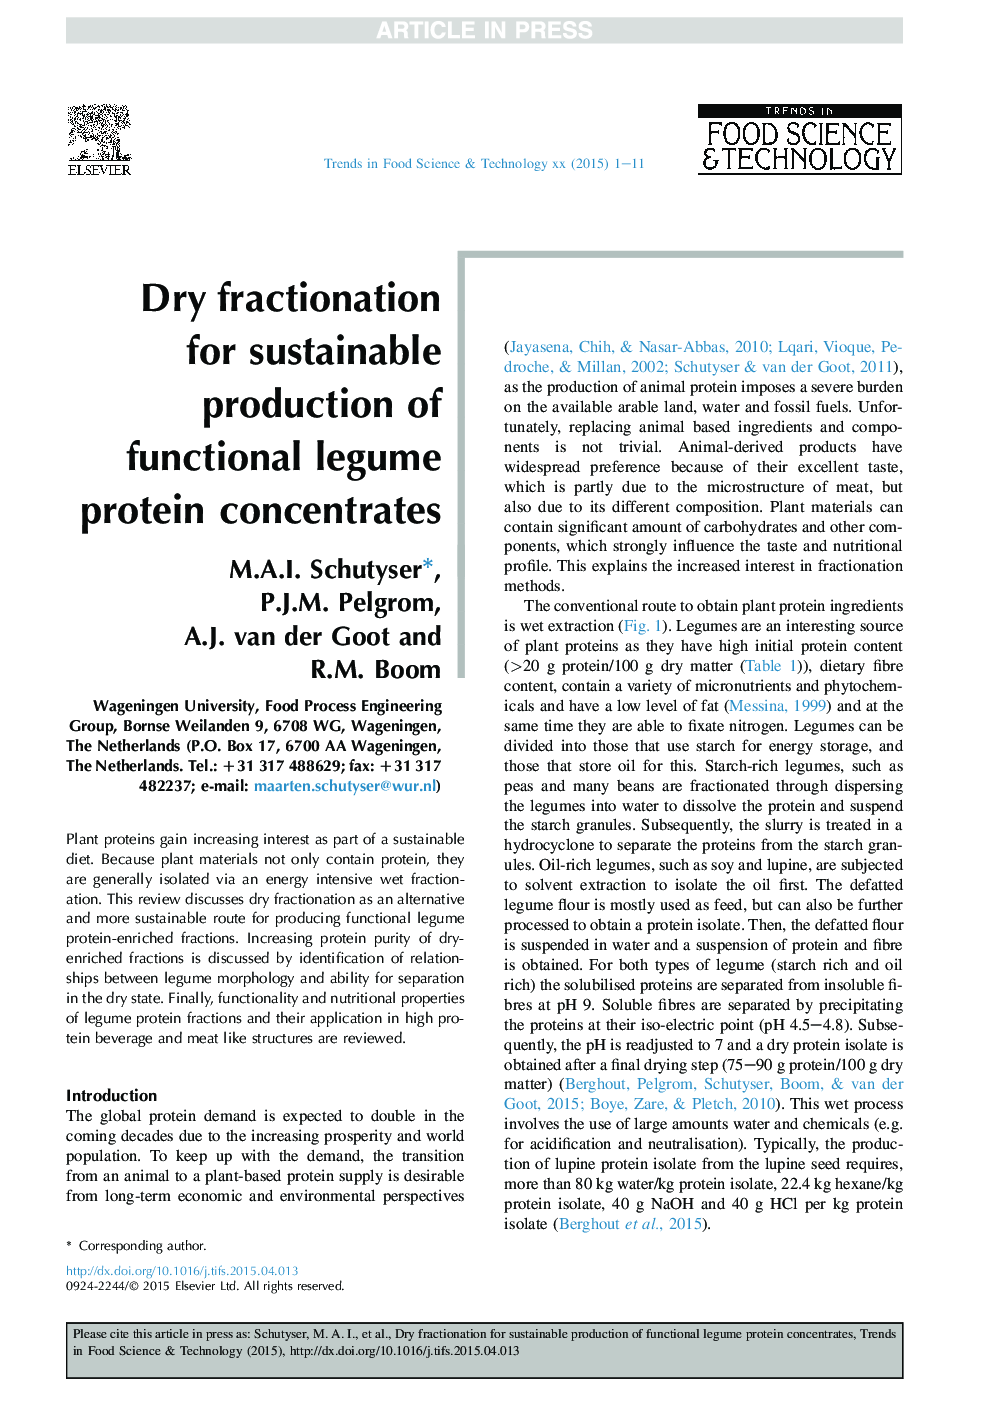 Dry fractionation for sustainable production of functional legume protein concentrates